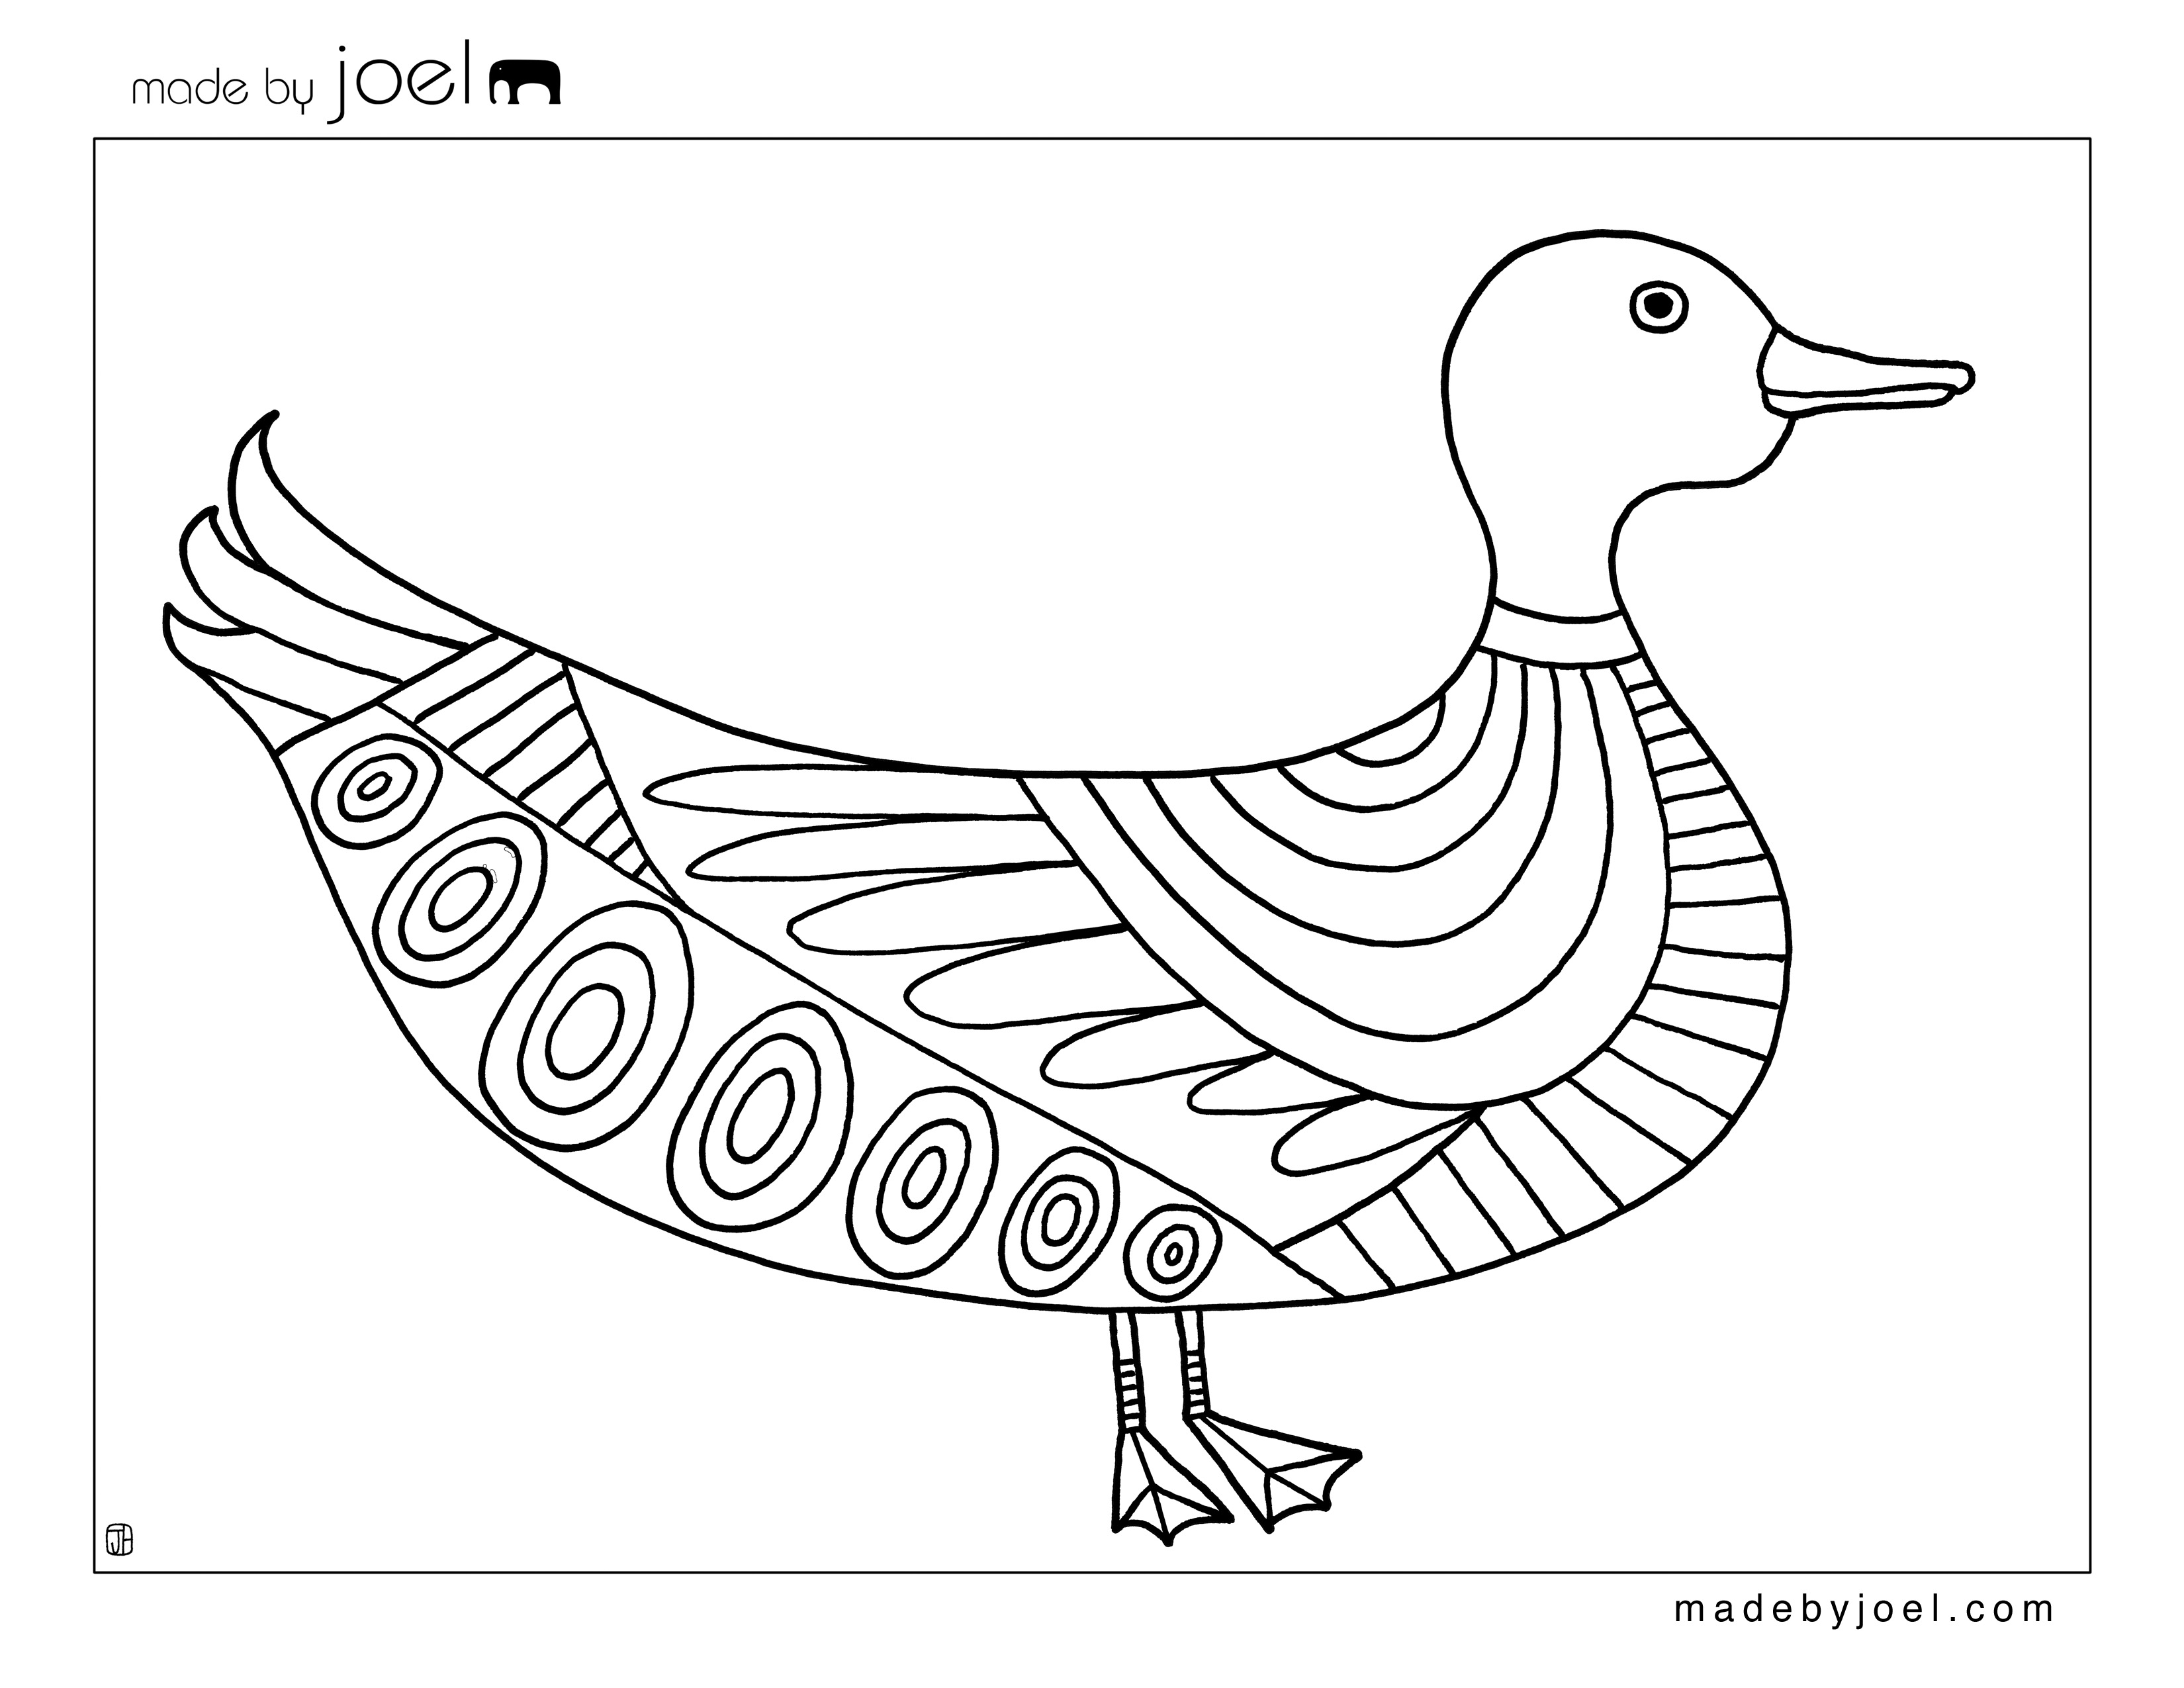 duck-coloring-sheet-made-by-joel